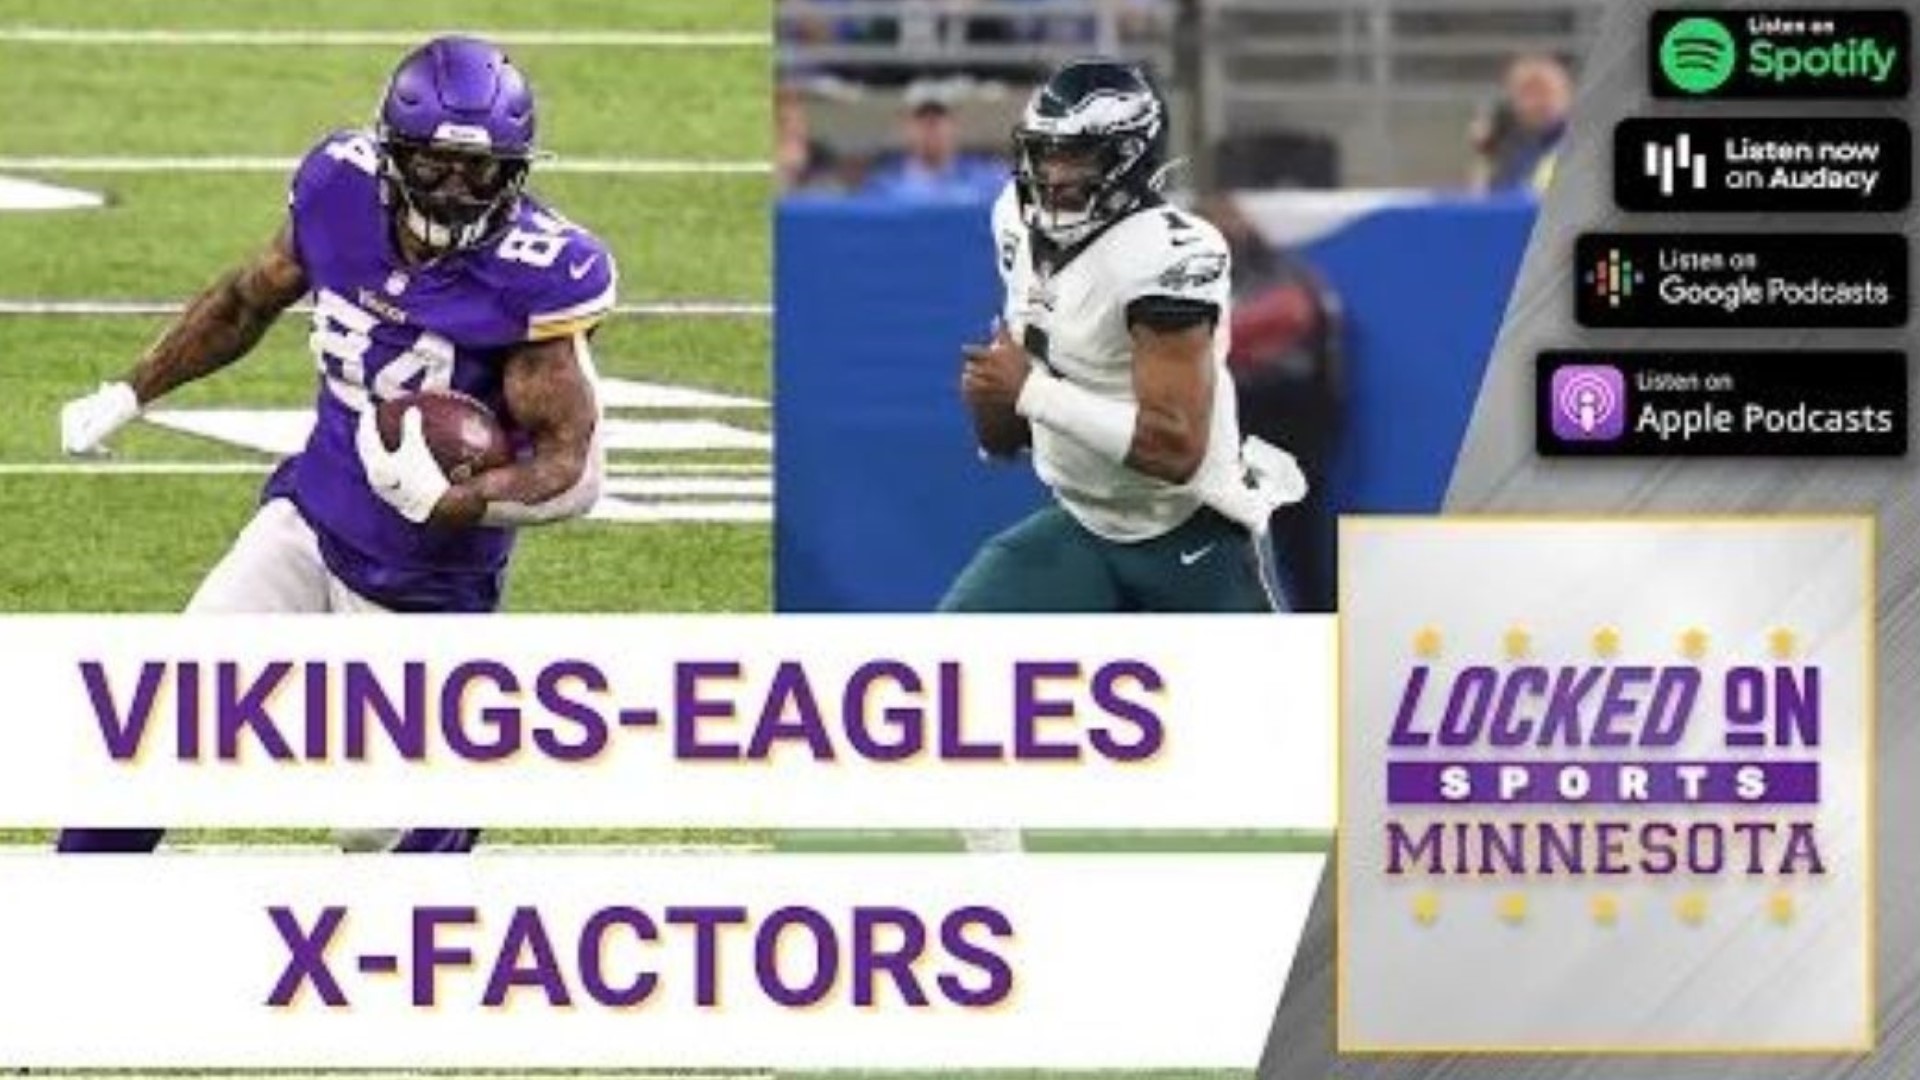 Ron Johnson, Sam Ekstrom, and Luke Inman break down the key players in the contest and scheme changes they expect from the Vikings.